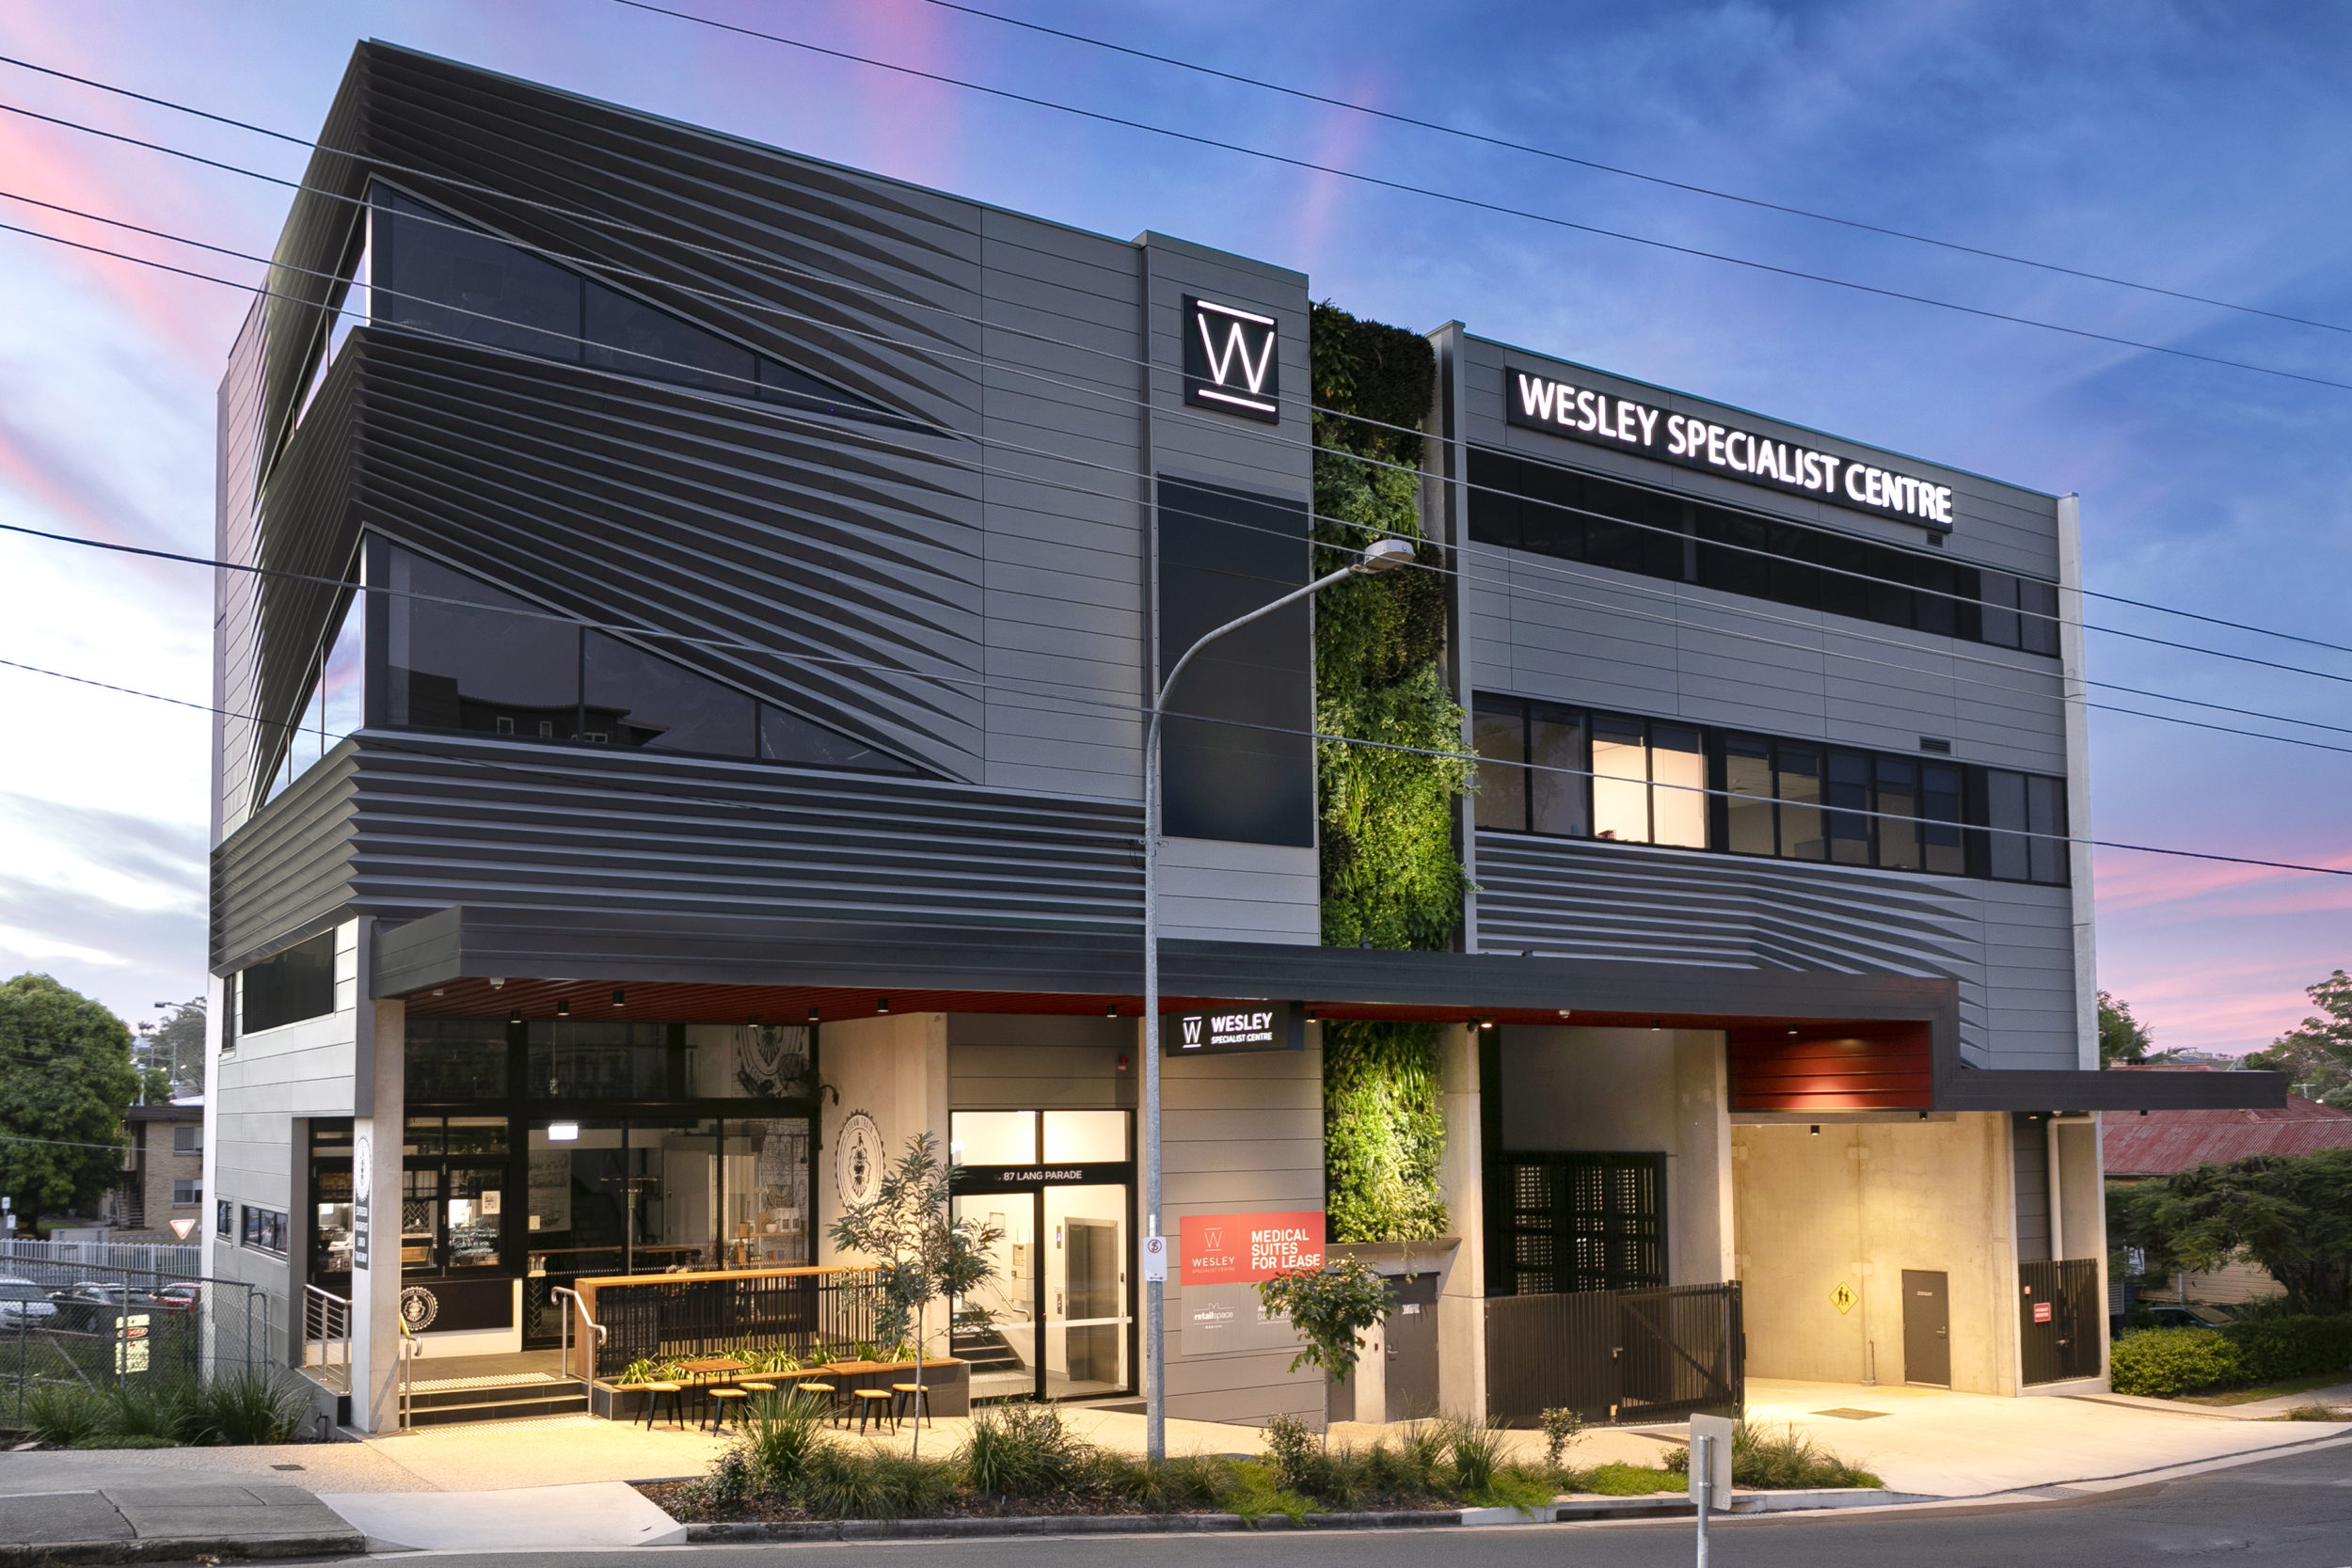 Commercial Project Management of Wesley Specialist Centre